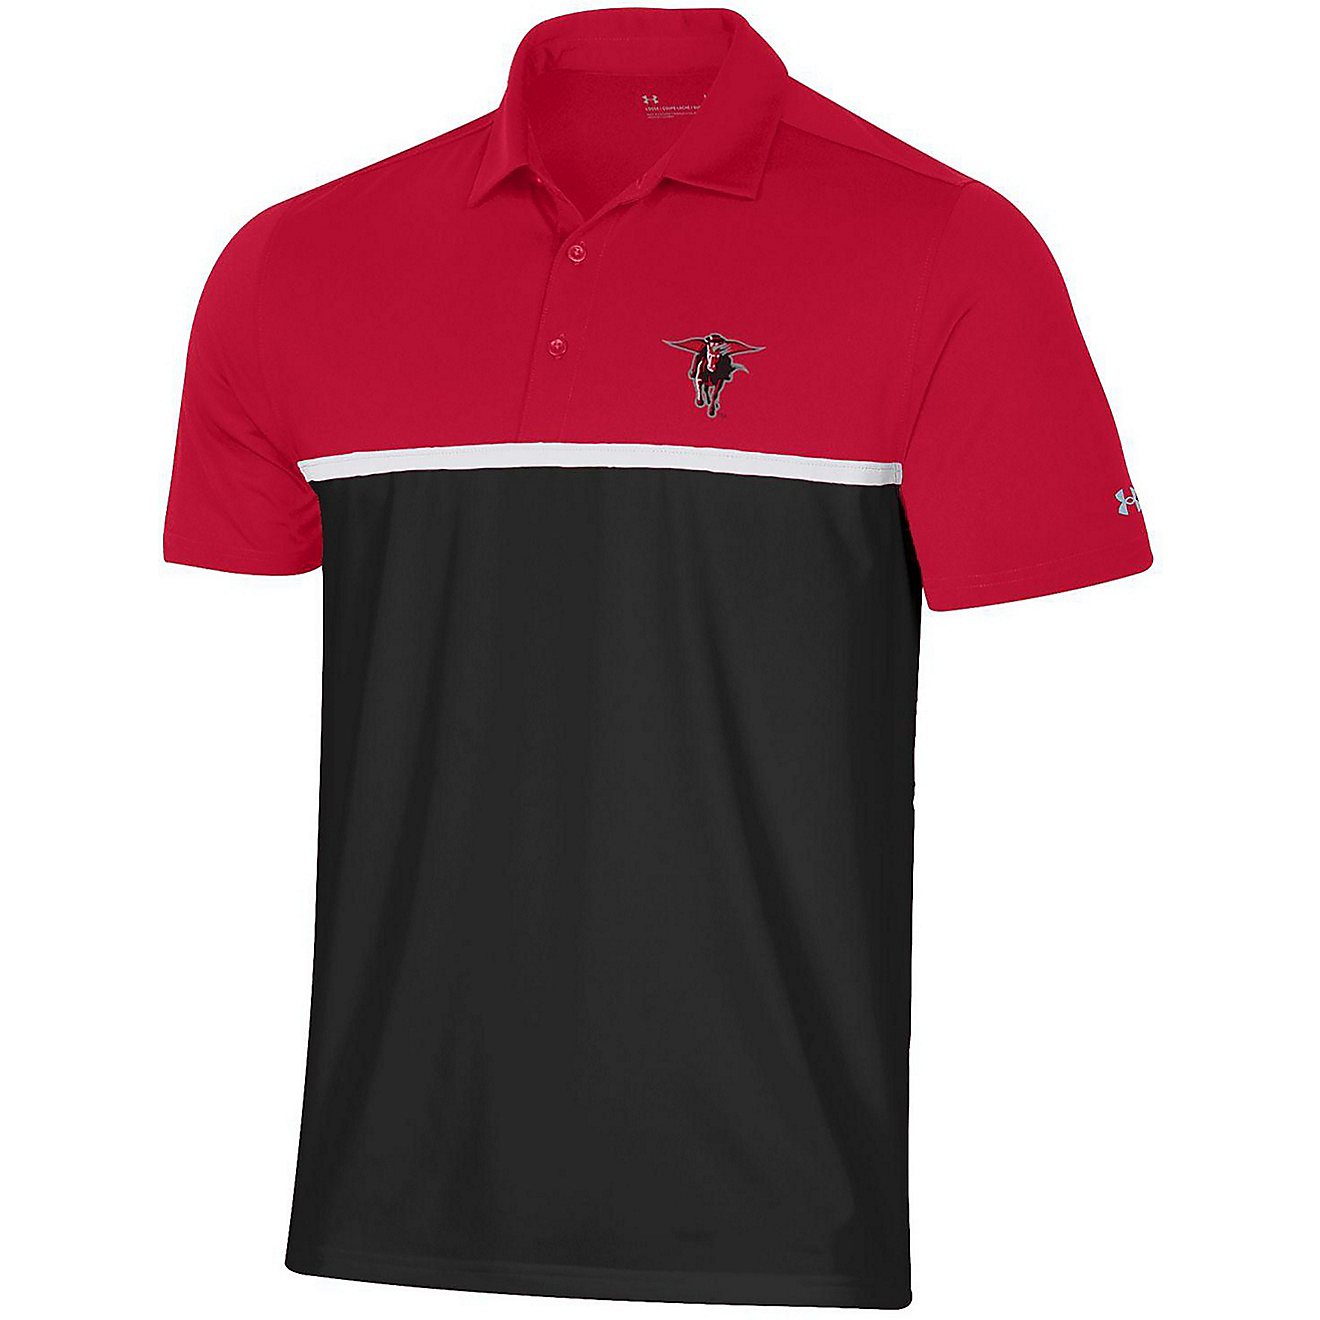 Under Armour Men's Texas Tech University Gameday Polo Shirt                                                                      - view number 1